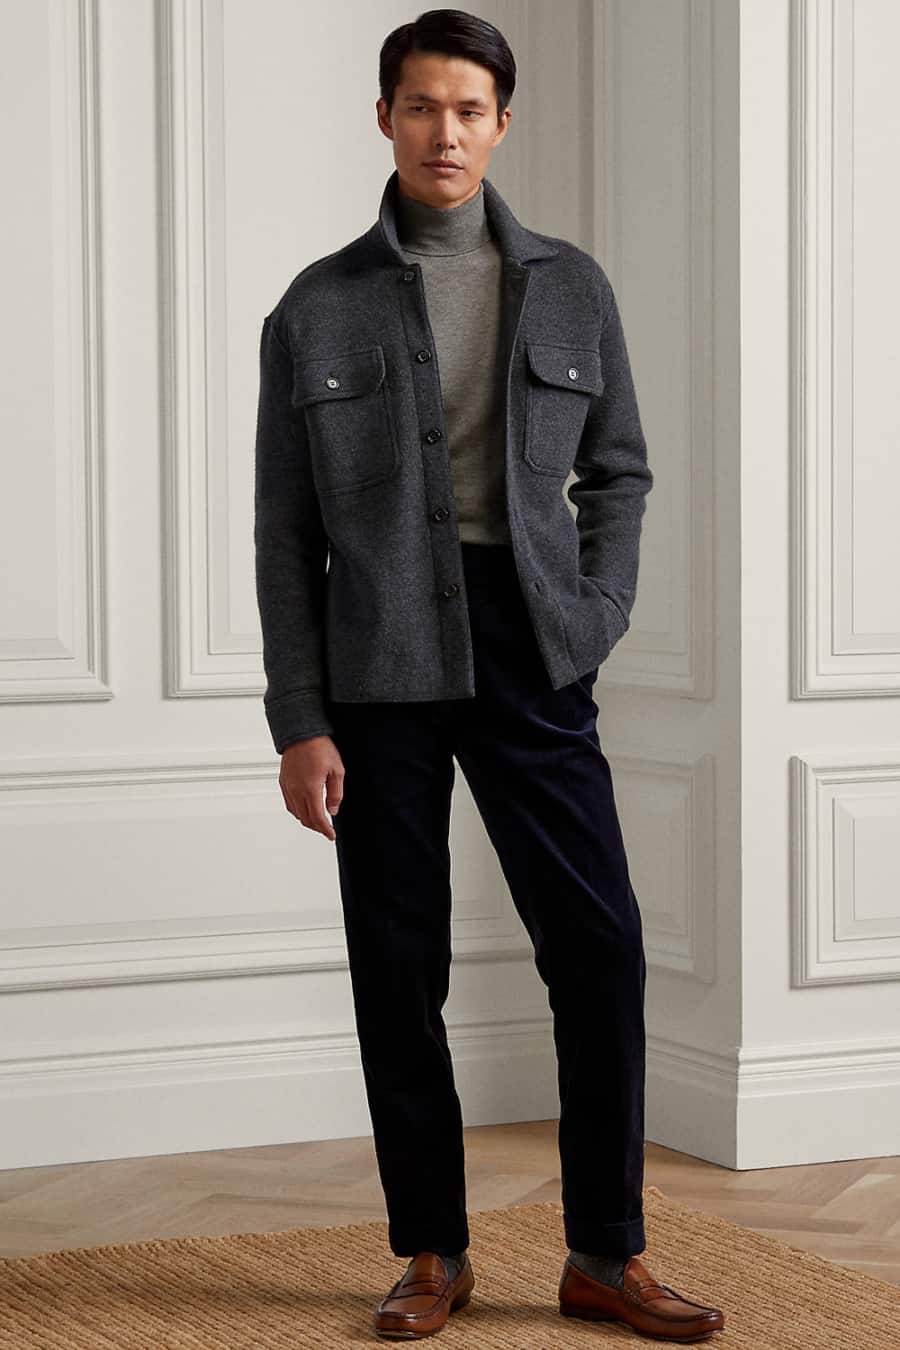 Men's navy corduroy trousers, grey turtleneck, charcoal flannel shirt and tan loafers outfit